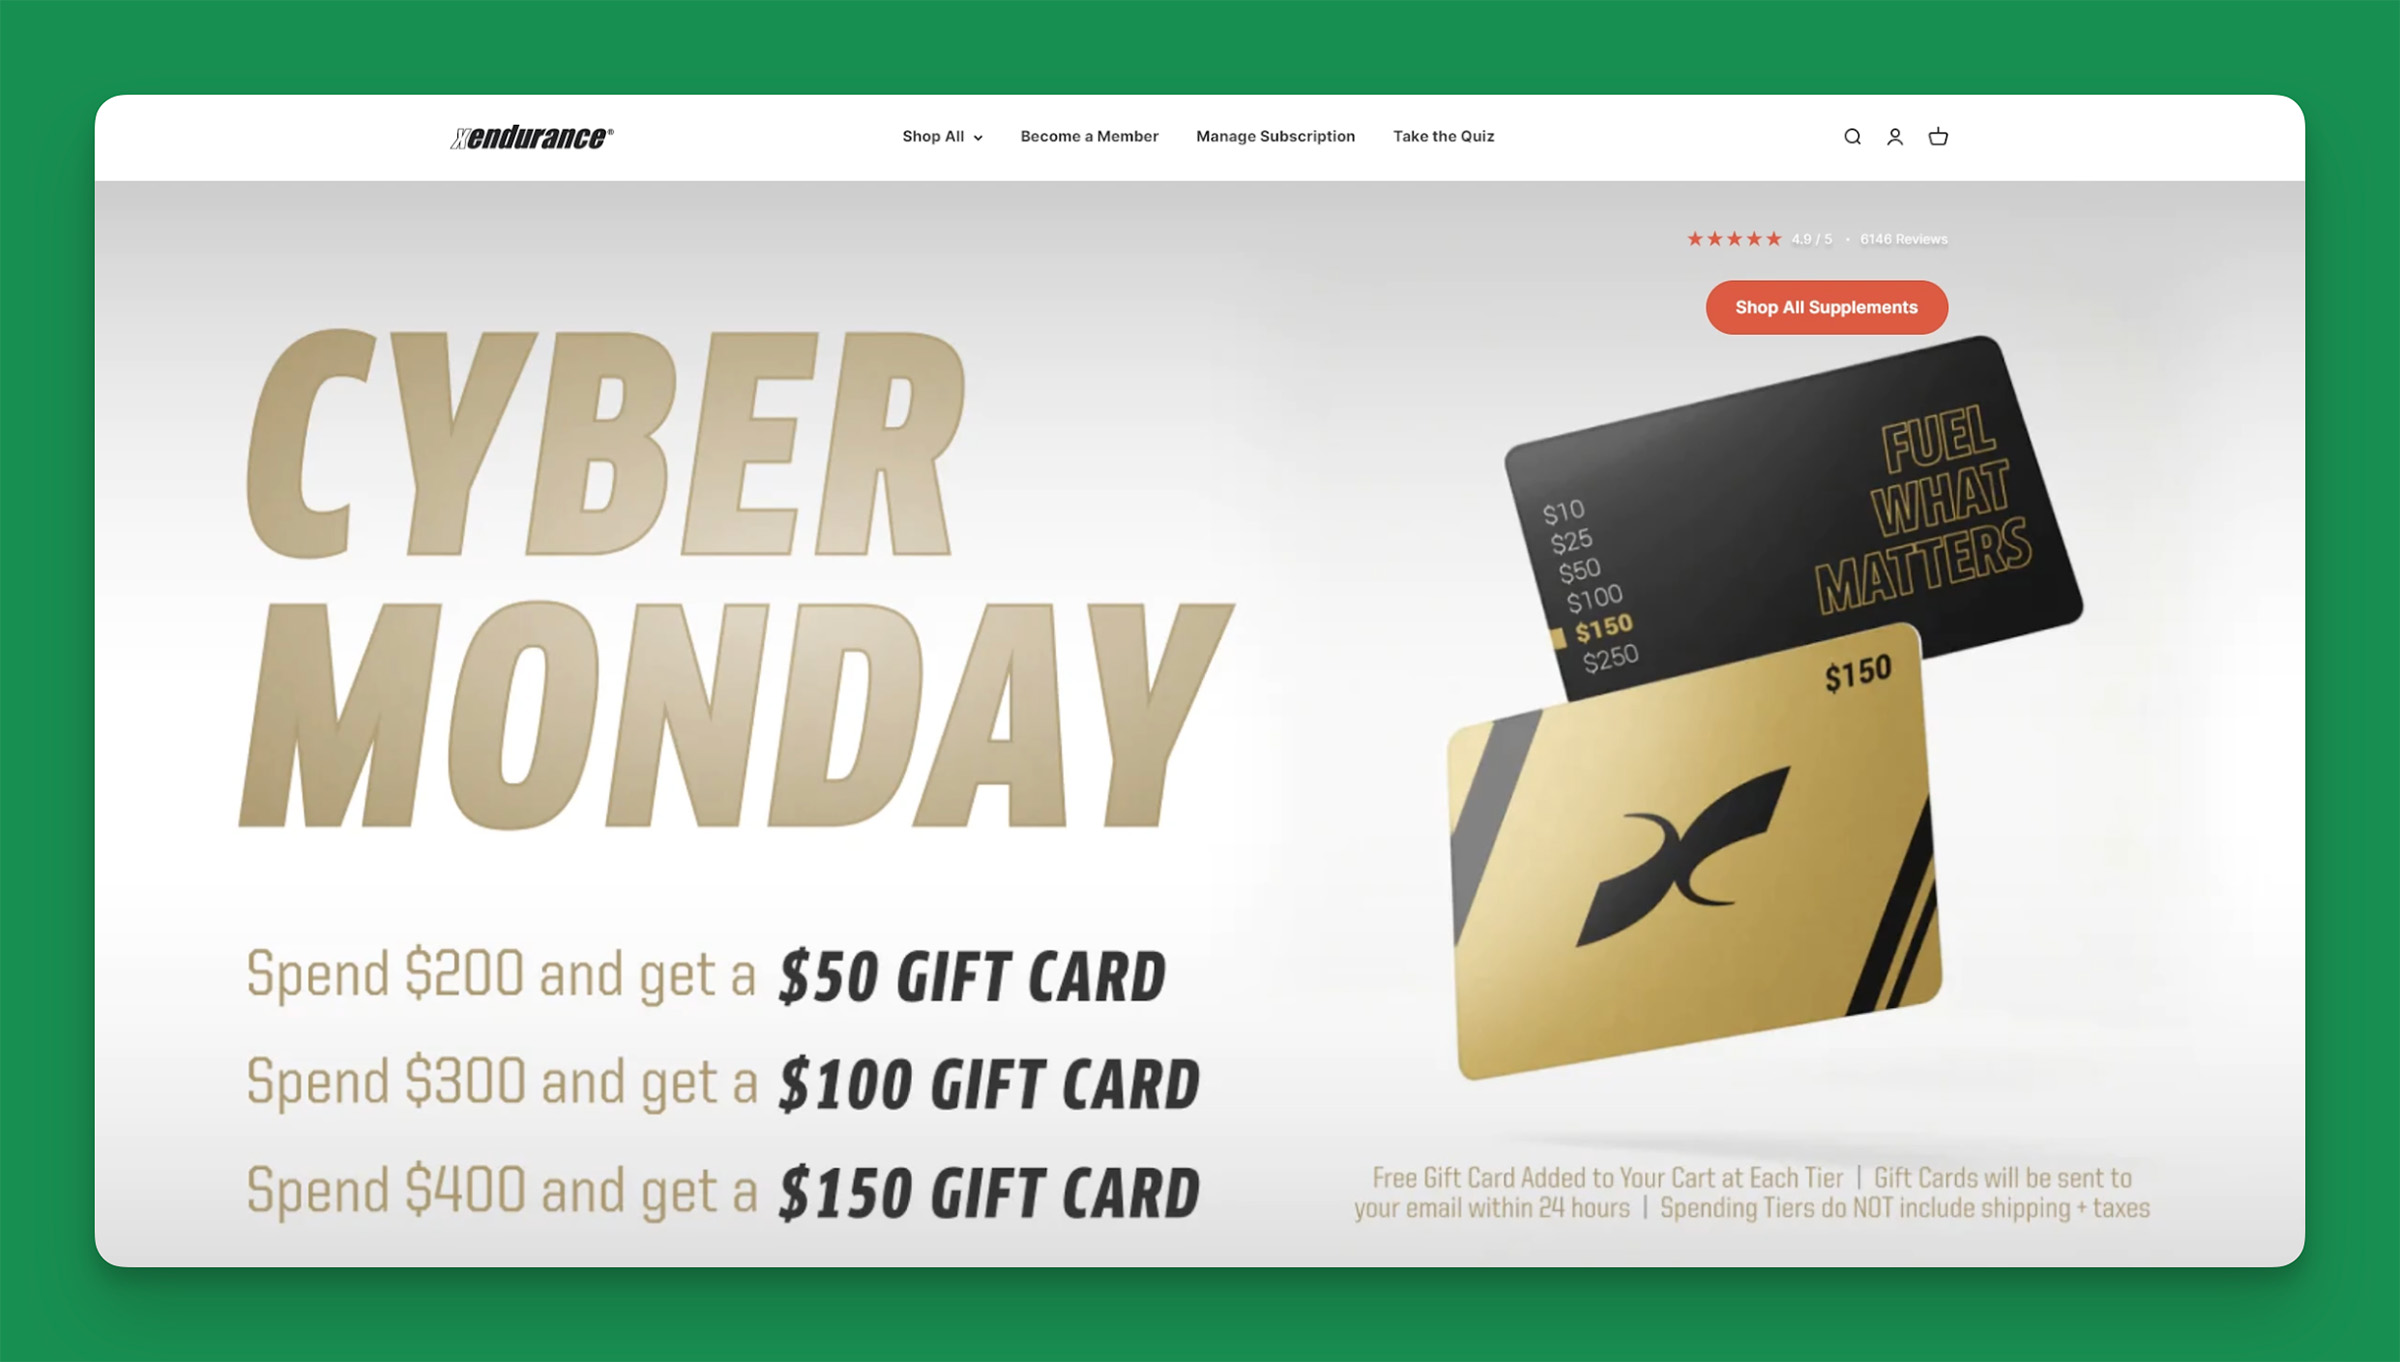 Xendurance’s tiered gift card offer